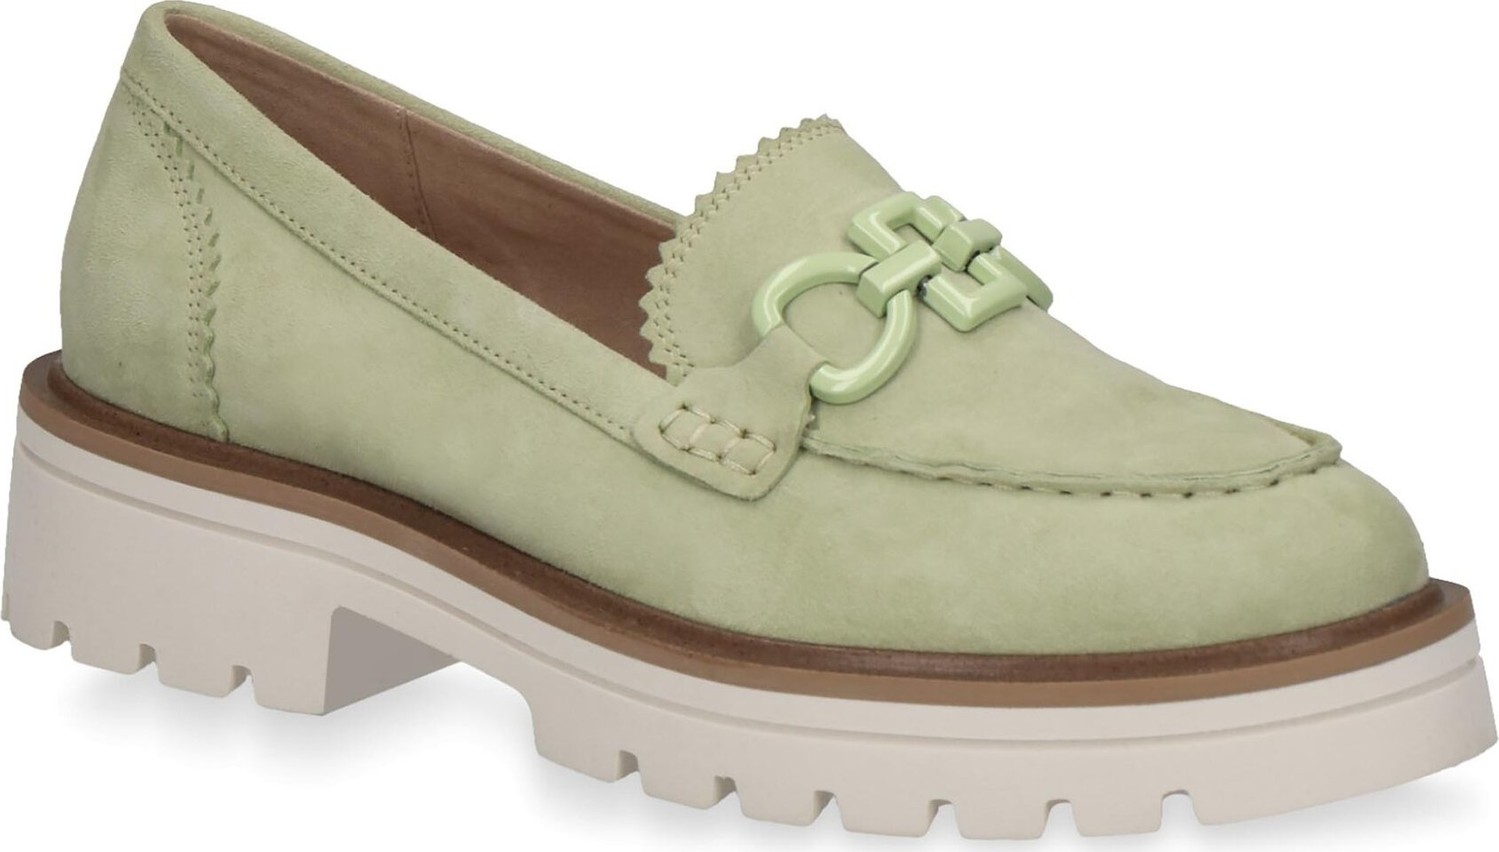 Loafersy Caprice 9-24706-20 Apple Suede 704